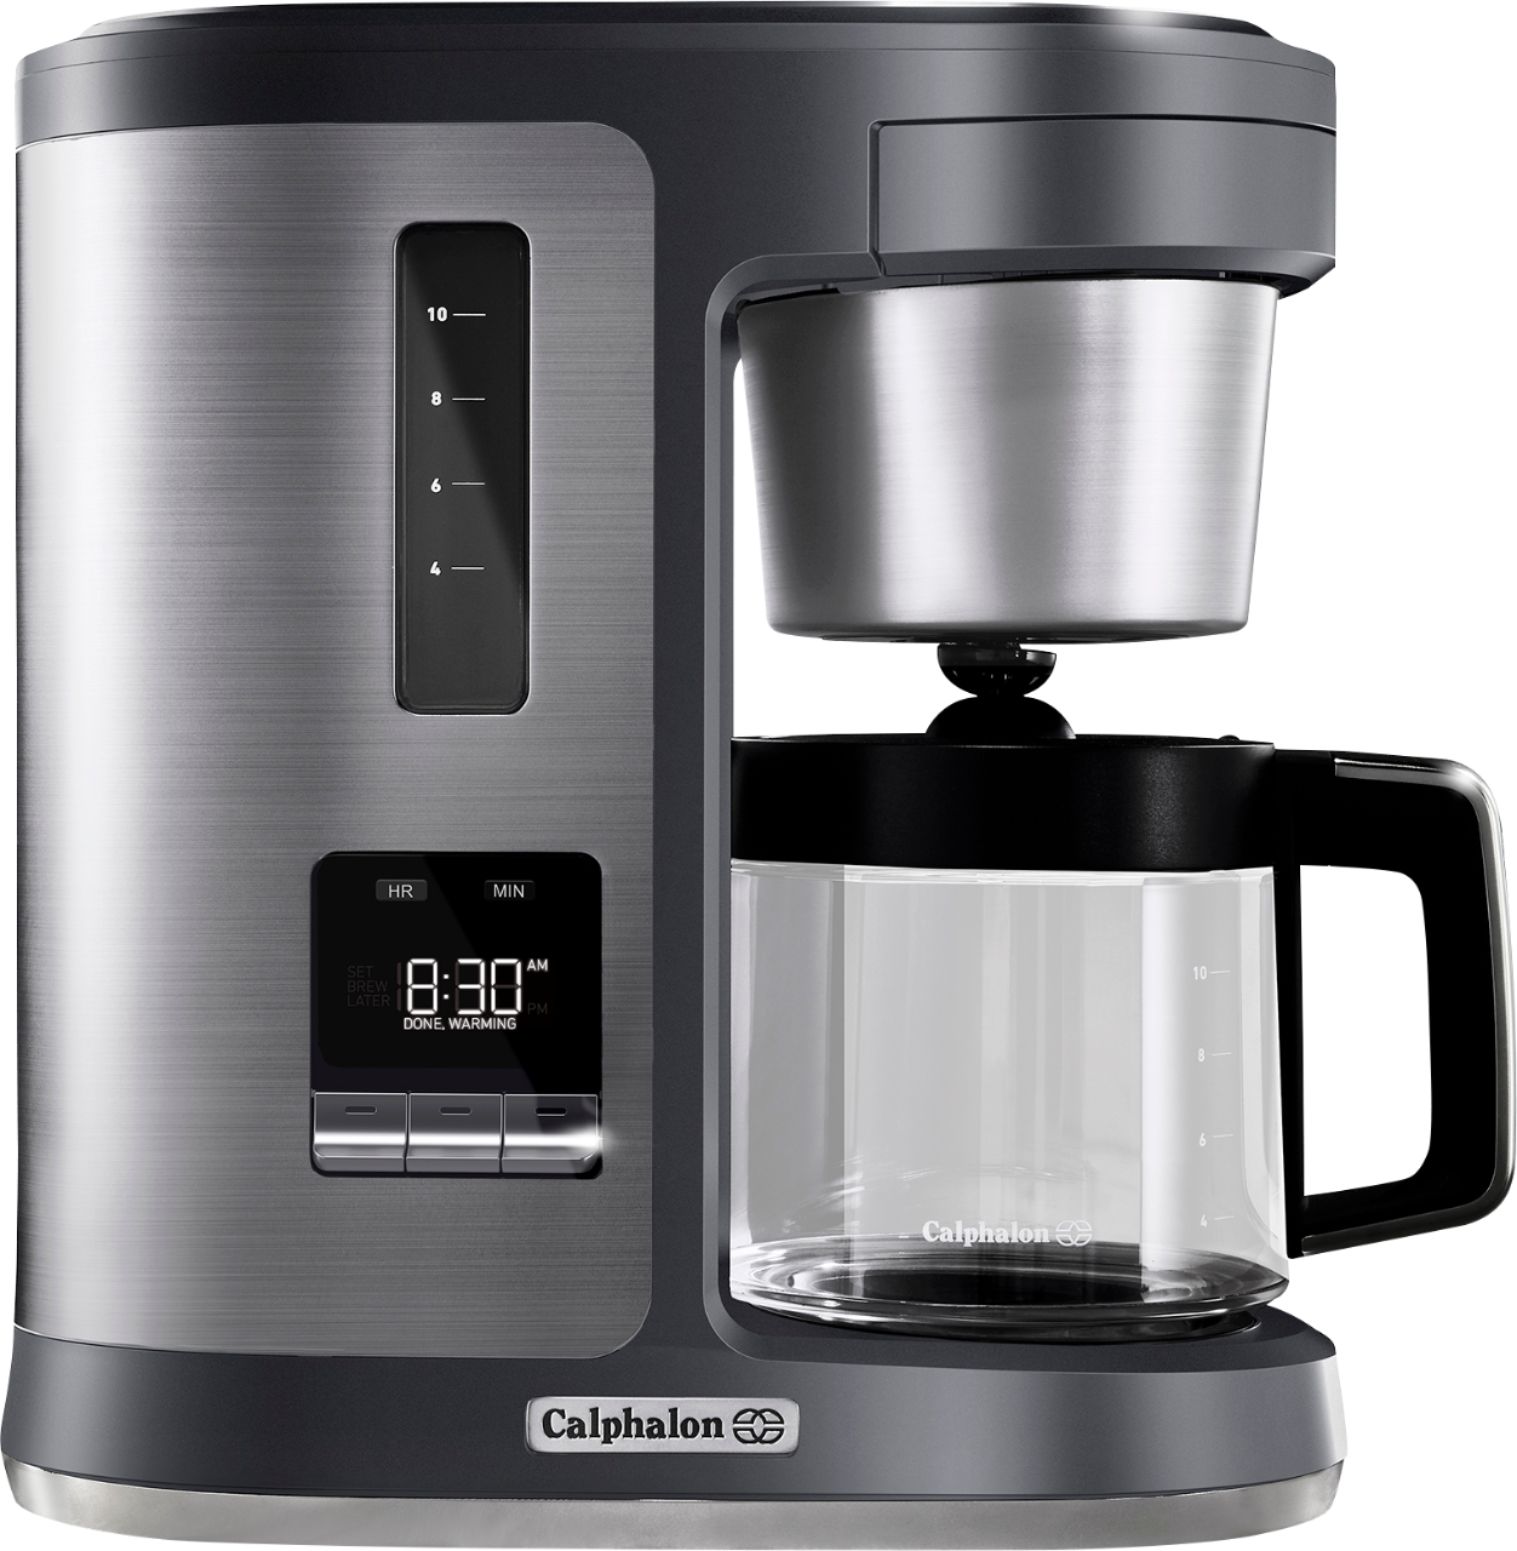 Basics 5 Cup Coffee Maker with Reusable Filter, Black and Stainless  Steel